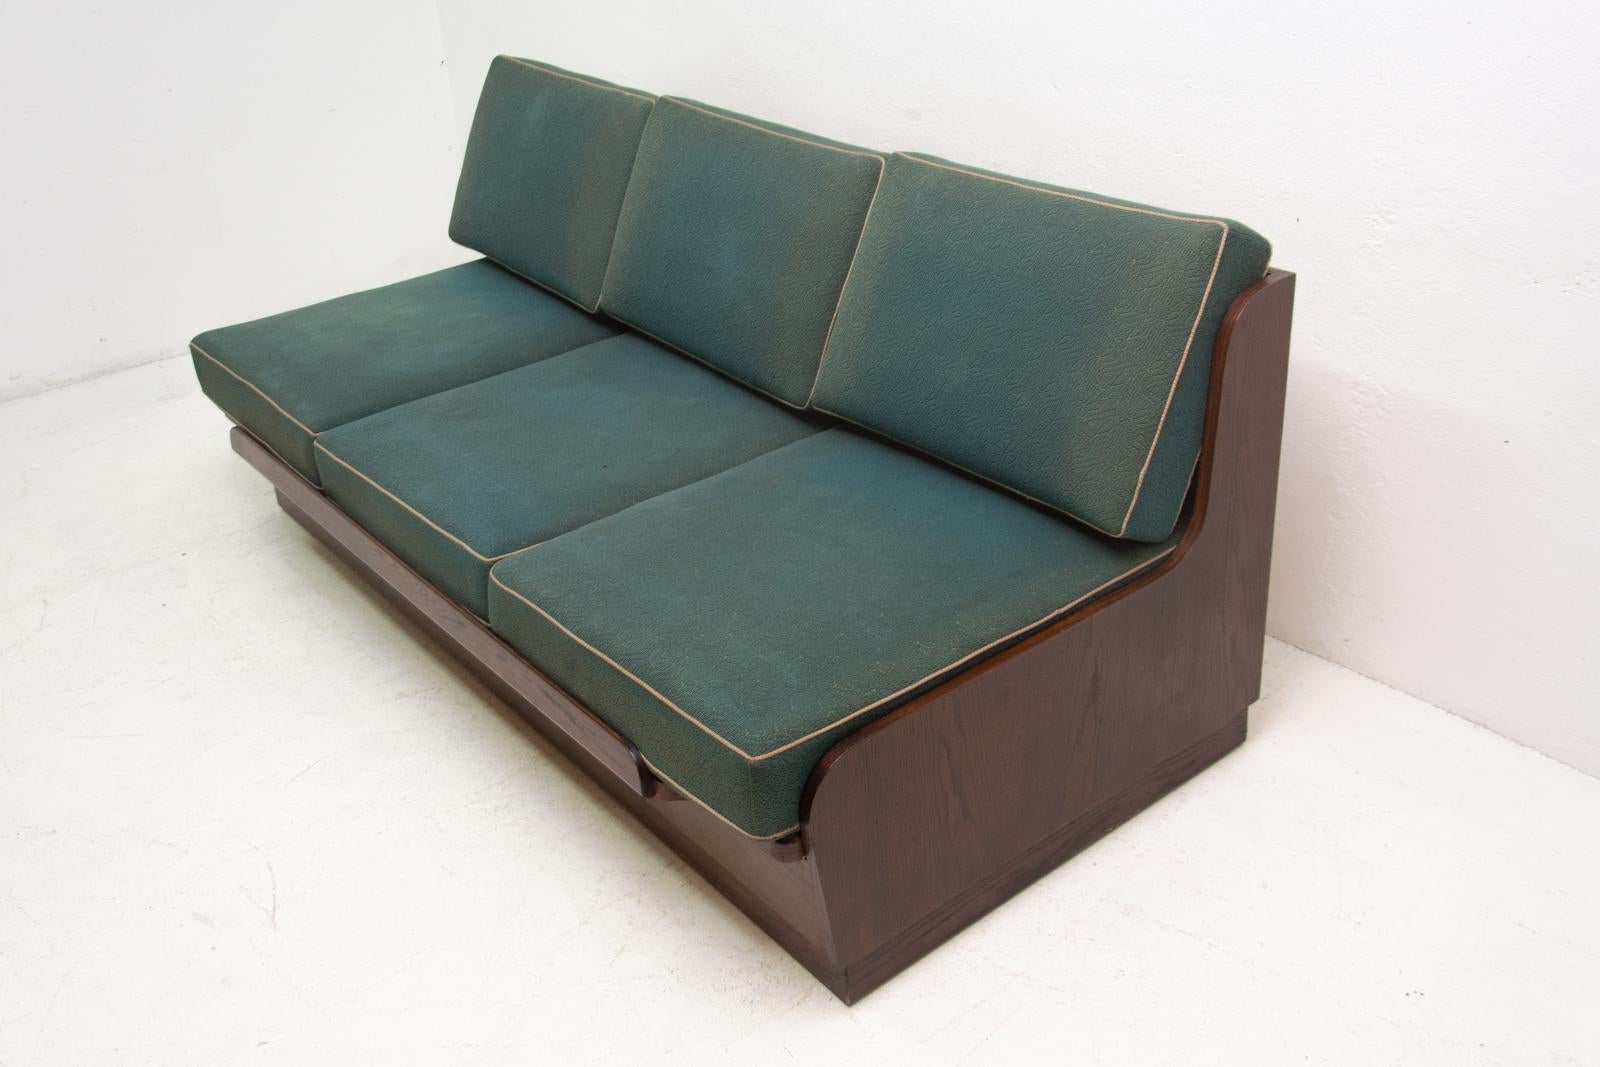 Midcentury sofa bed, it was made by Interiér Praha company in the former Czechoslovakia in the 1950s. This sofa has a wooden structure, it´s is in good Vintage condition, the mattresses are faded in places, but overall in good condition.

Measure: